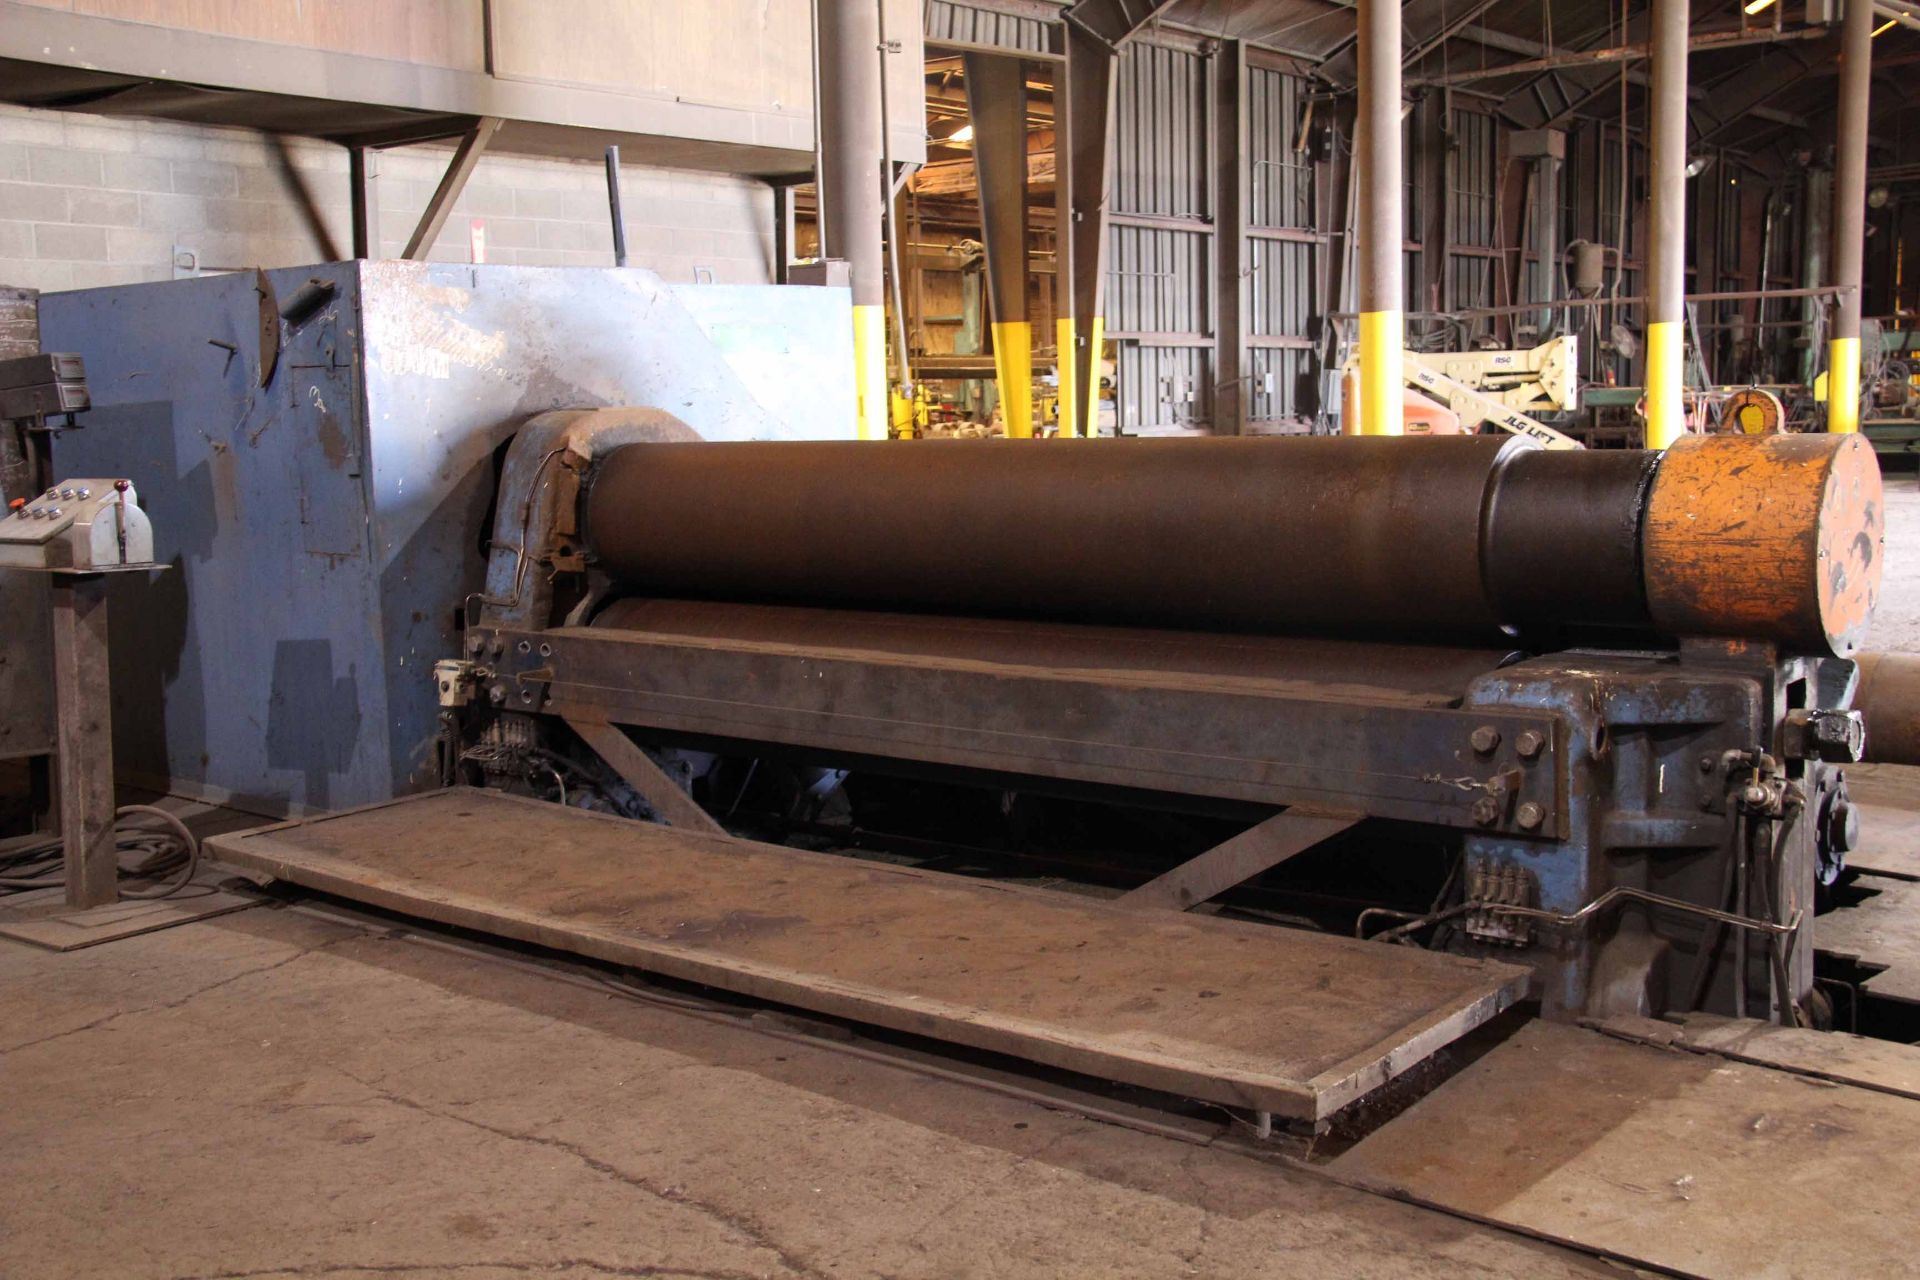 INITIAL PINCH PLATE BENDING ROLL, WEBB 10' X 1-3/16" MDL. 18L2, 19" top roll, air drop end, pwr. - Image 4 of 6